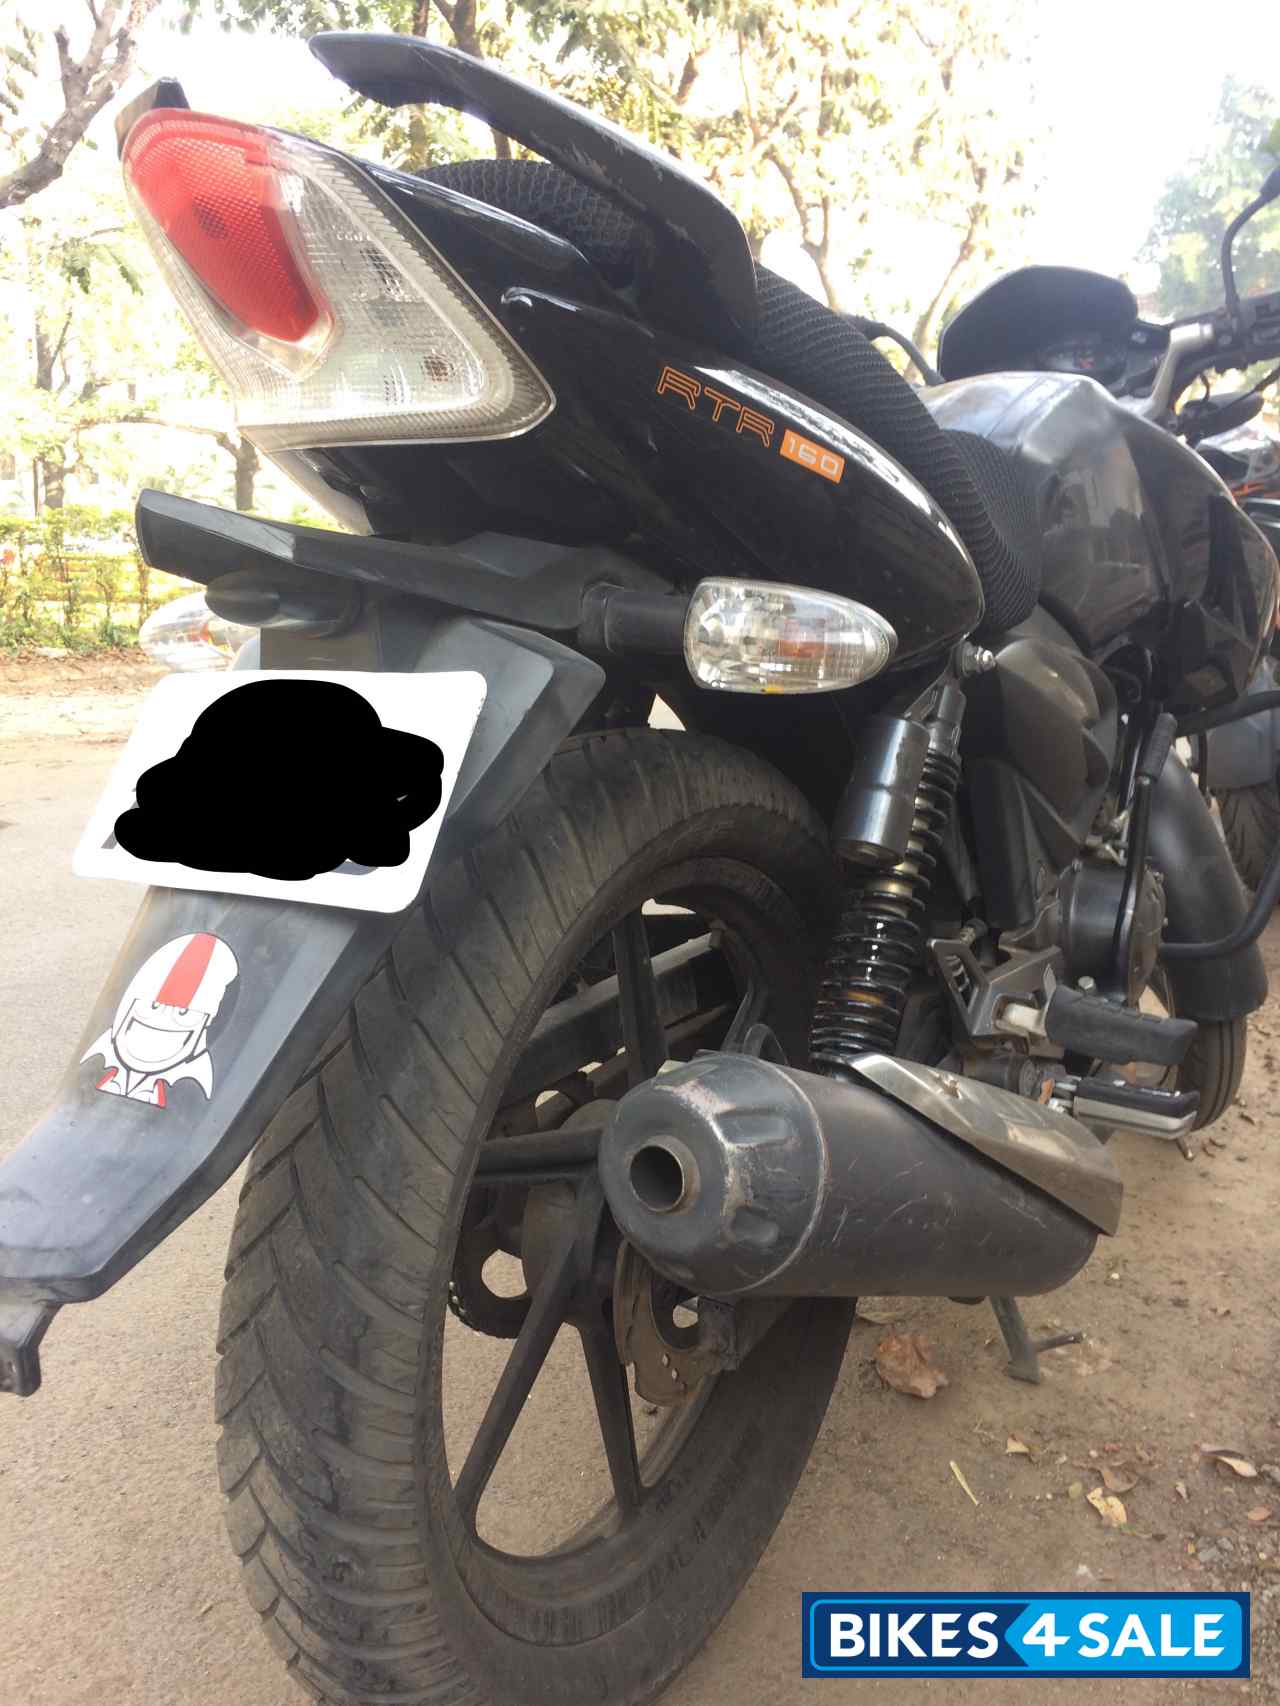 Used 11 Model Tvs Apache Rtr 160 For Sale In Pune Id Black Colour Bikes4sale